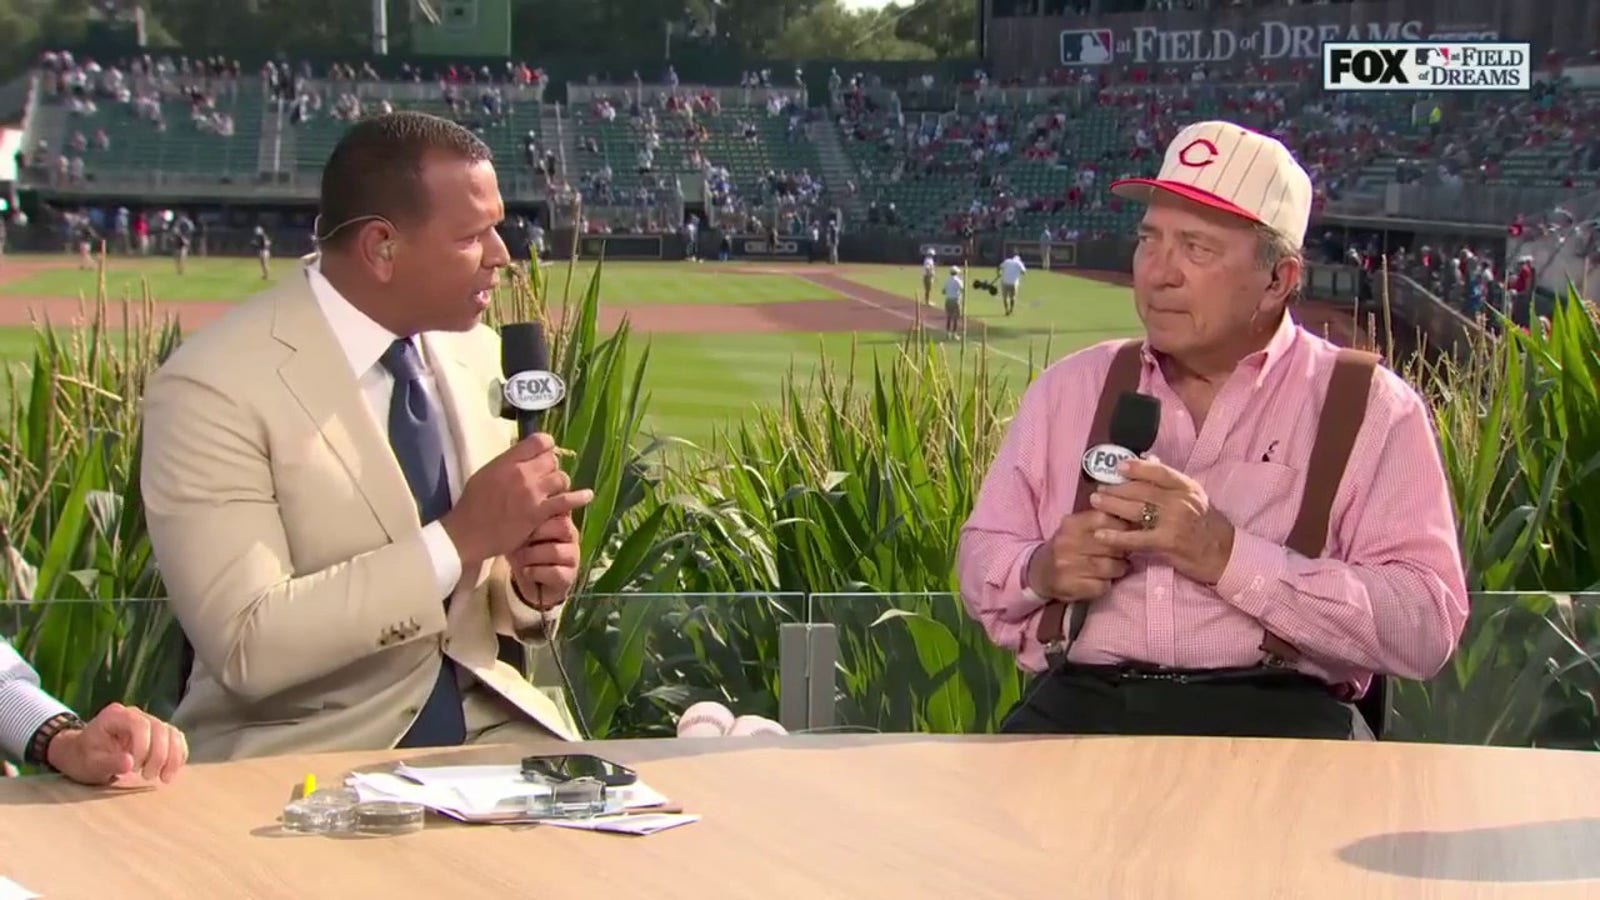 Johnny Bench on his love for the game of baseball